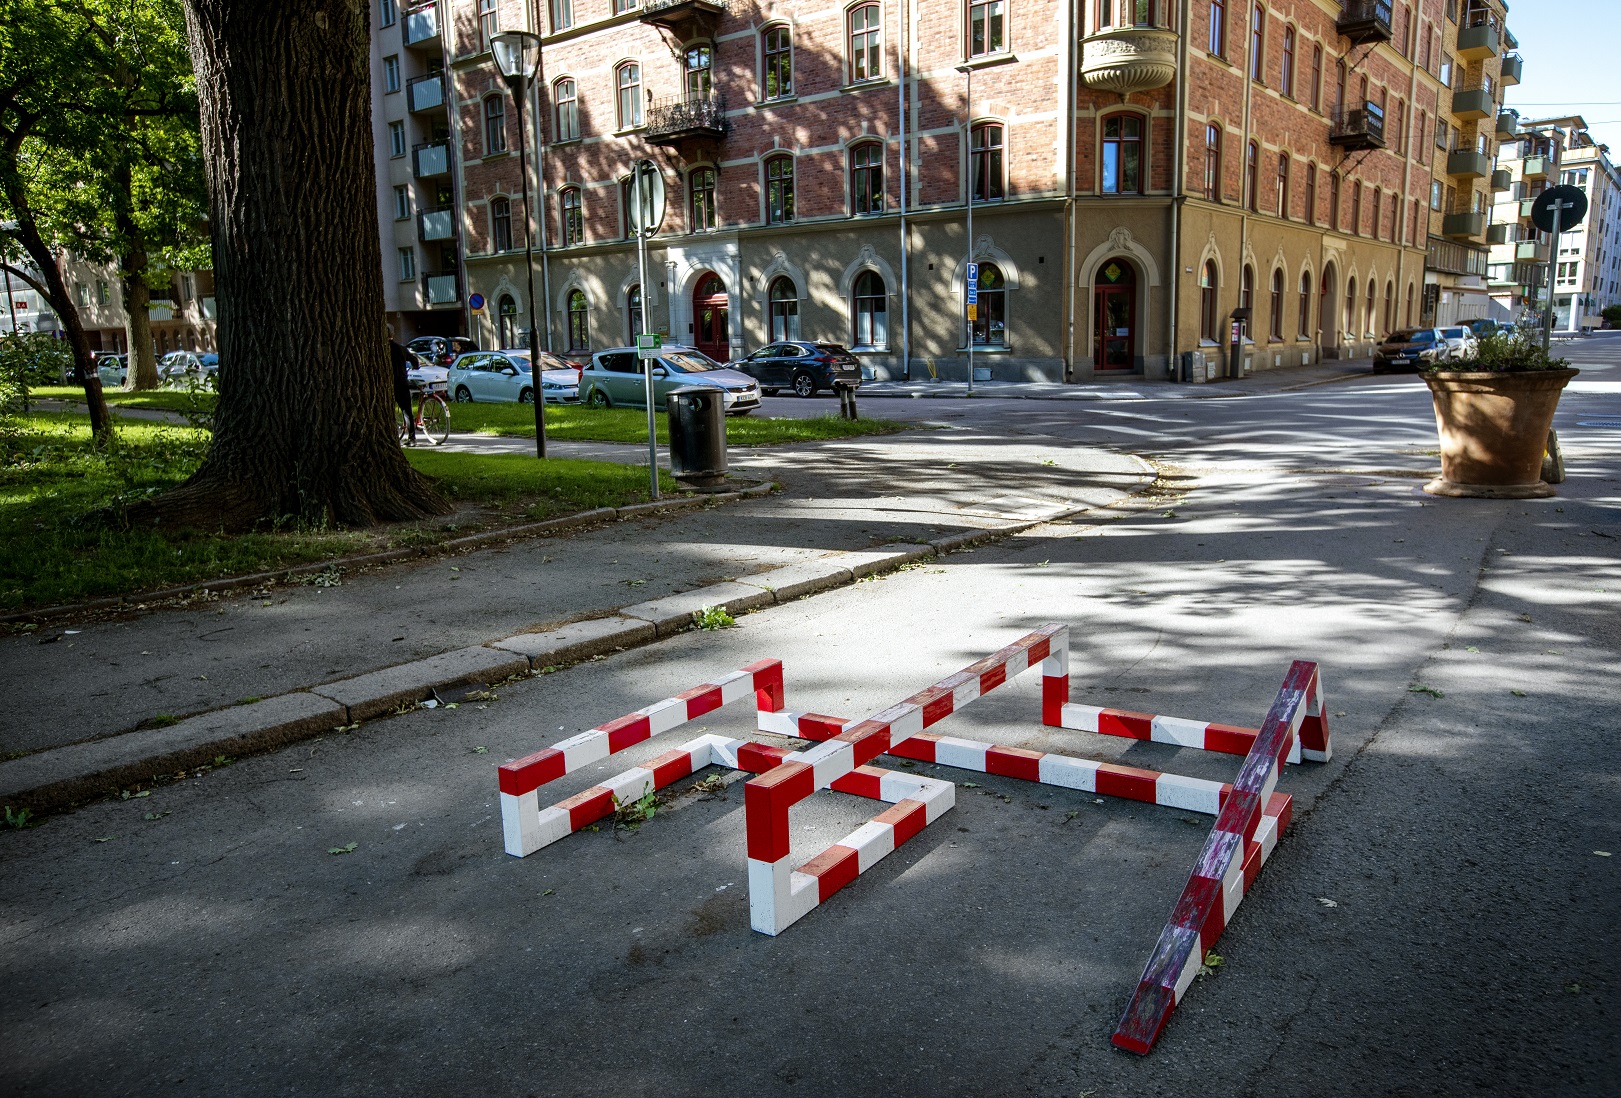 White and red-striped art stand on the asphalt with three ramps that you can skateboard on.